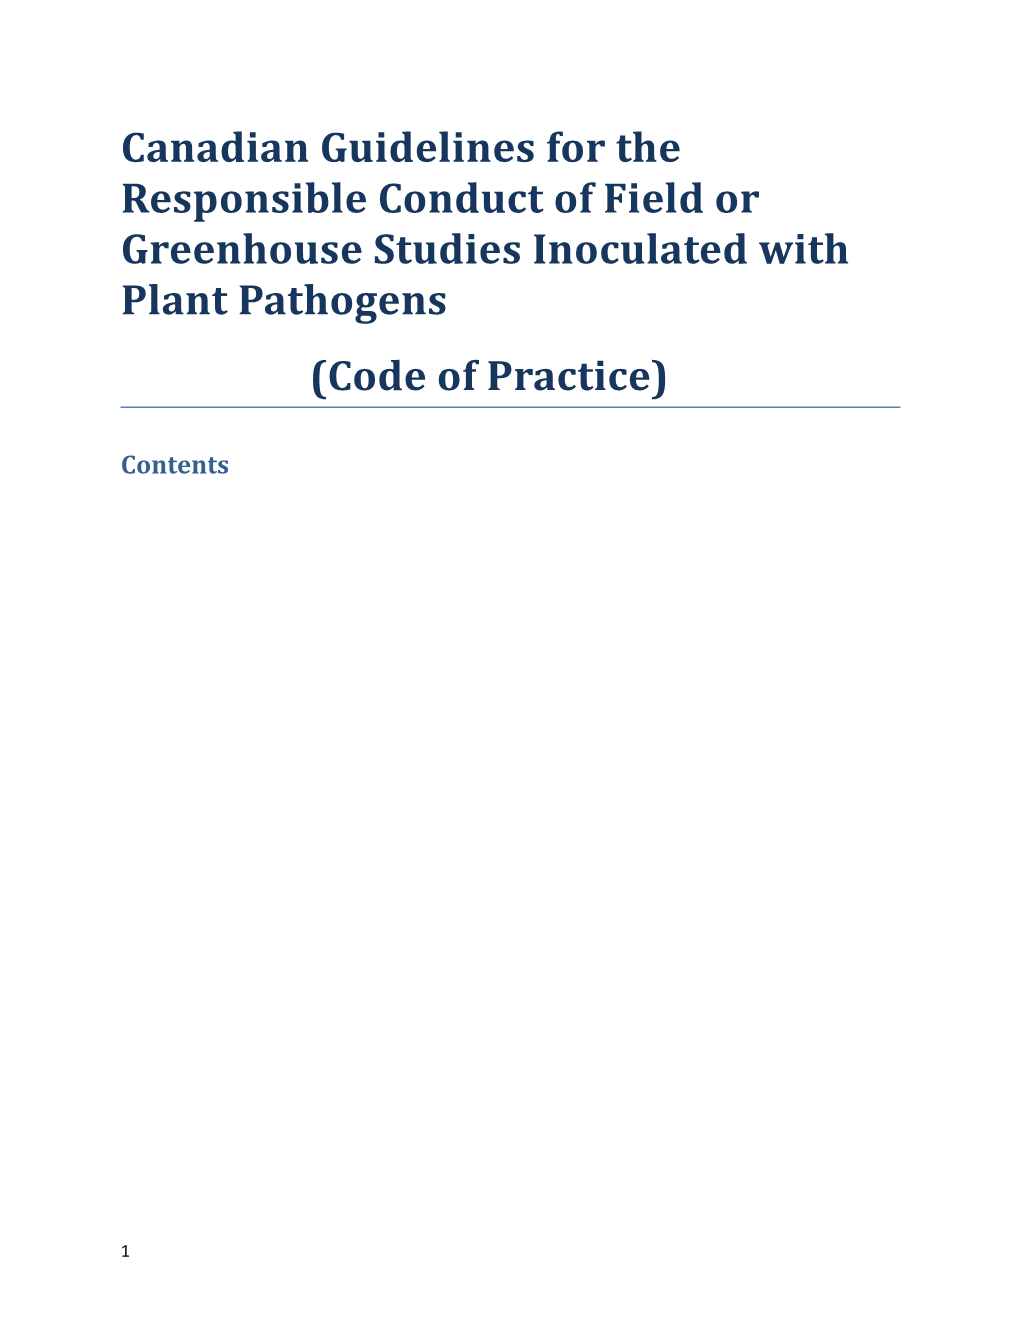 Guidelines for the Responsible Conduct of Field Or Greenhouse Studies Inoculated with Plant